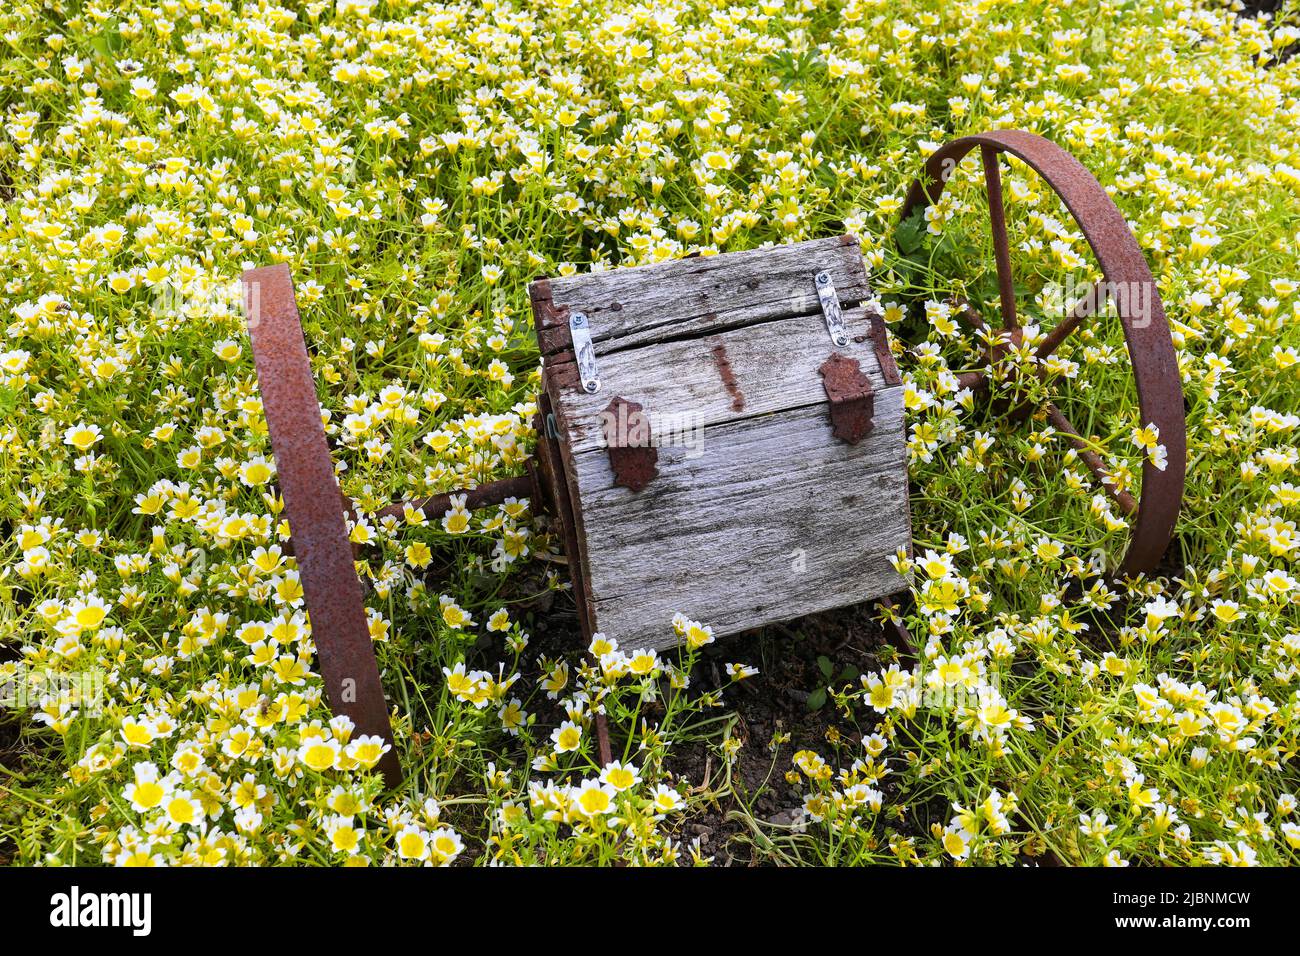 Poached egg plant growing around an old wooden and rusting seeding box, Dumfries house, Scotland, UK Stock Photo